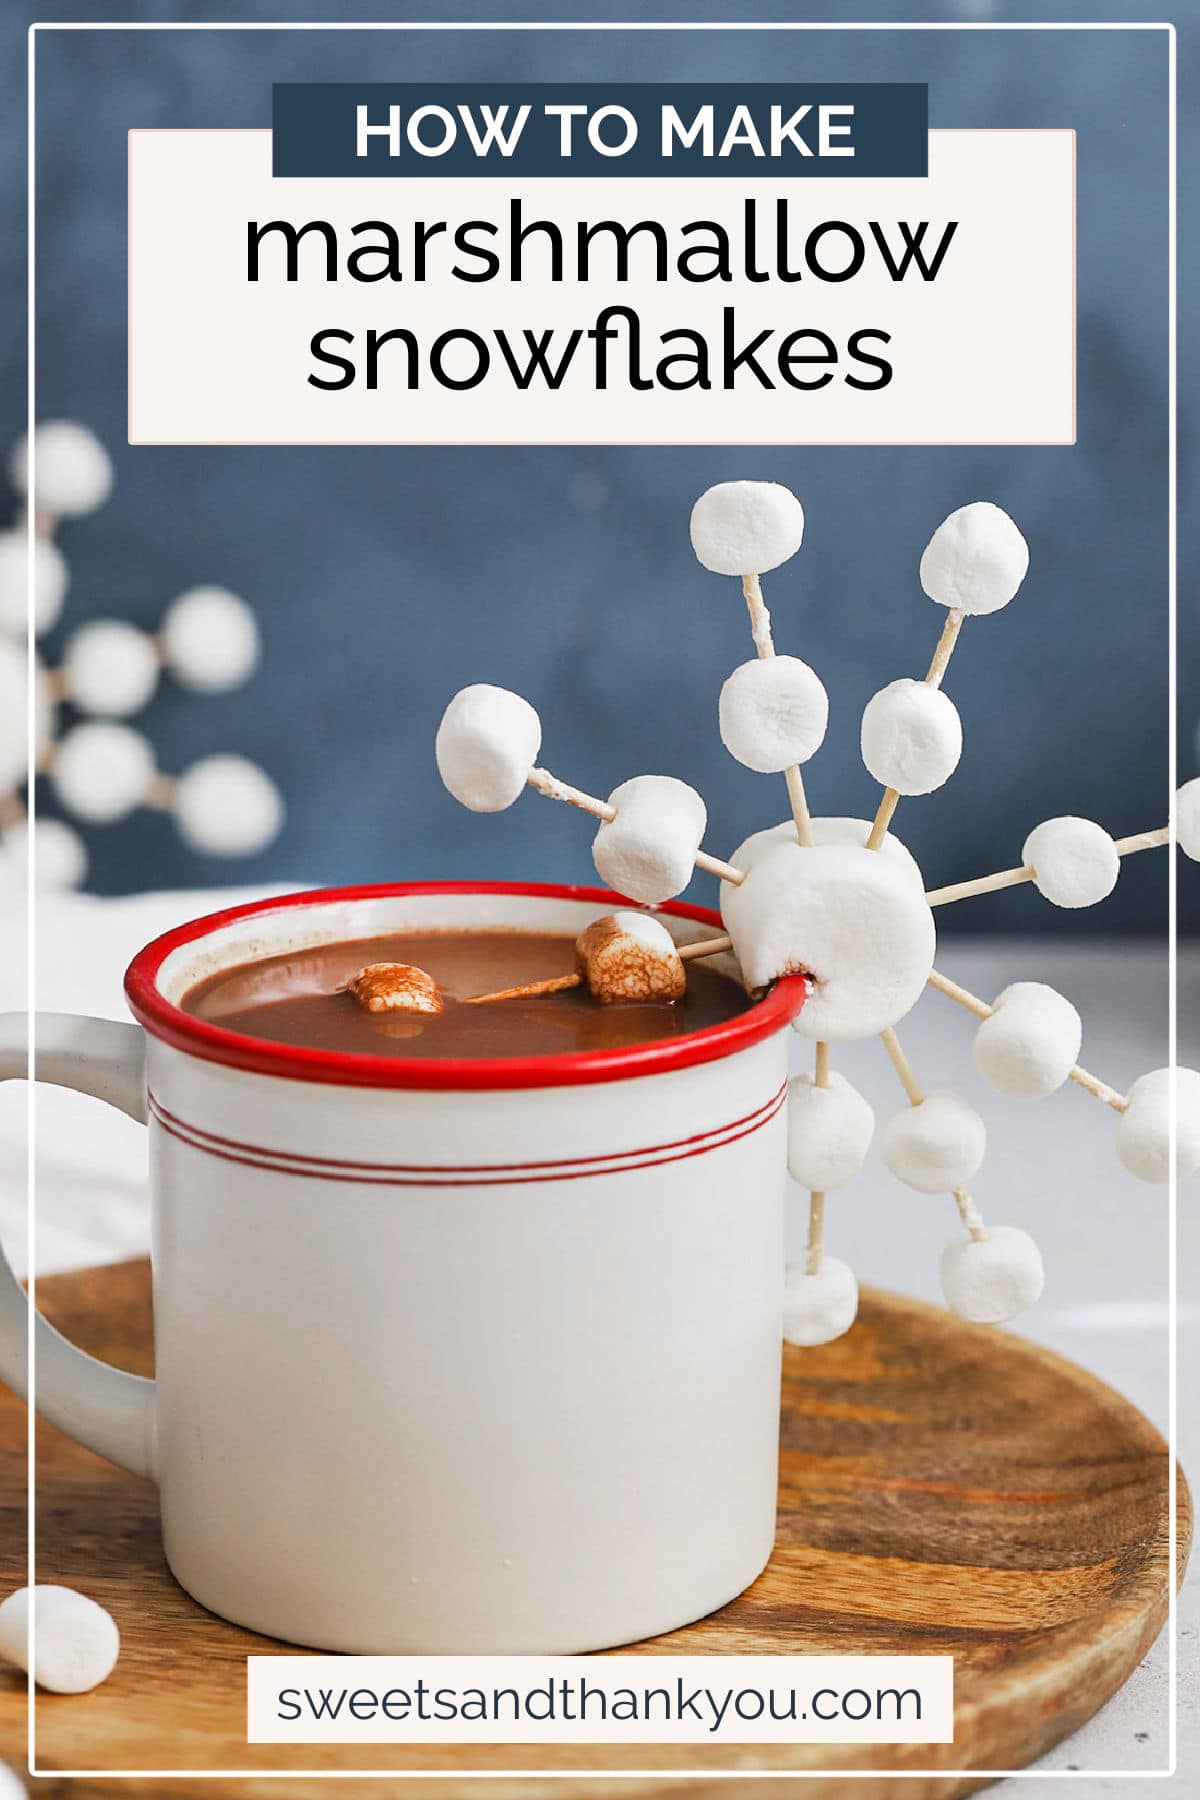 How To Make Marshmallow Snowflakes - Learn how to make marshmallow and toothpick snowflakes to decorate your next mug of hot cocoa! It only takes minutes & it's so fun! // marshmallow craft // hot chocolate topping // winter activity for kids // snow activity for kids // kids craft // marshmallow art // hot cocoa topping // gluten free recipe // snowflake STEM activity // winter STEM activity